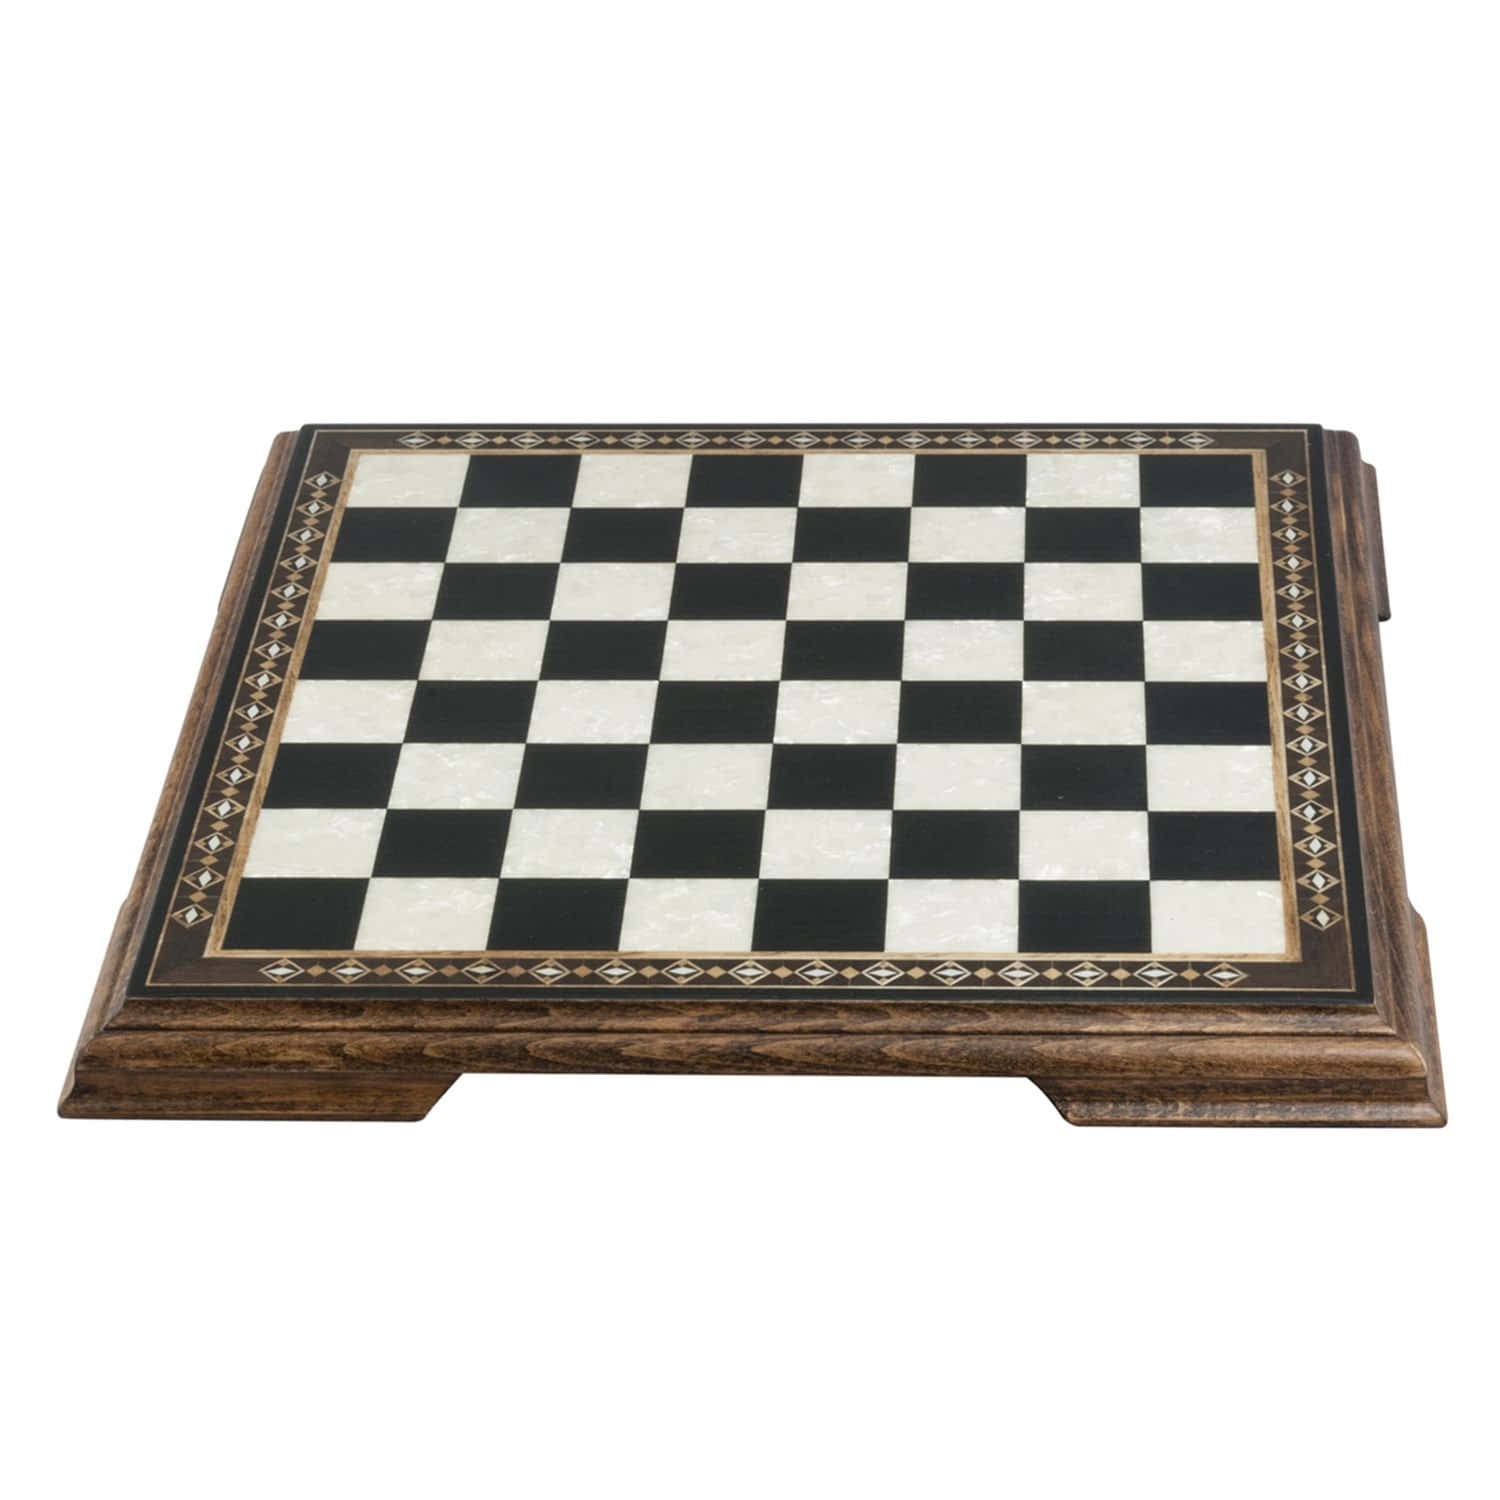 A Classic Game Of Chess Is Played On A Traditional Wooden Chessboard. Background